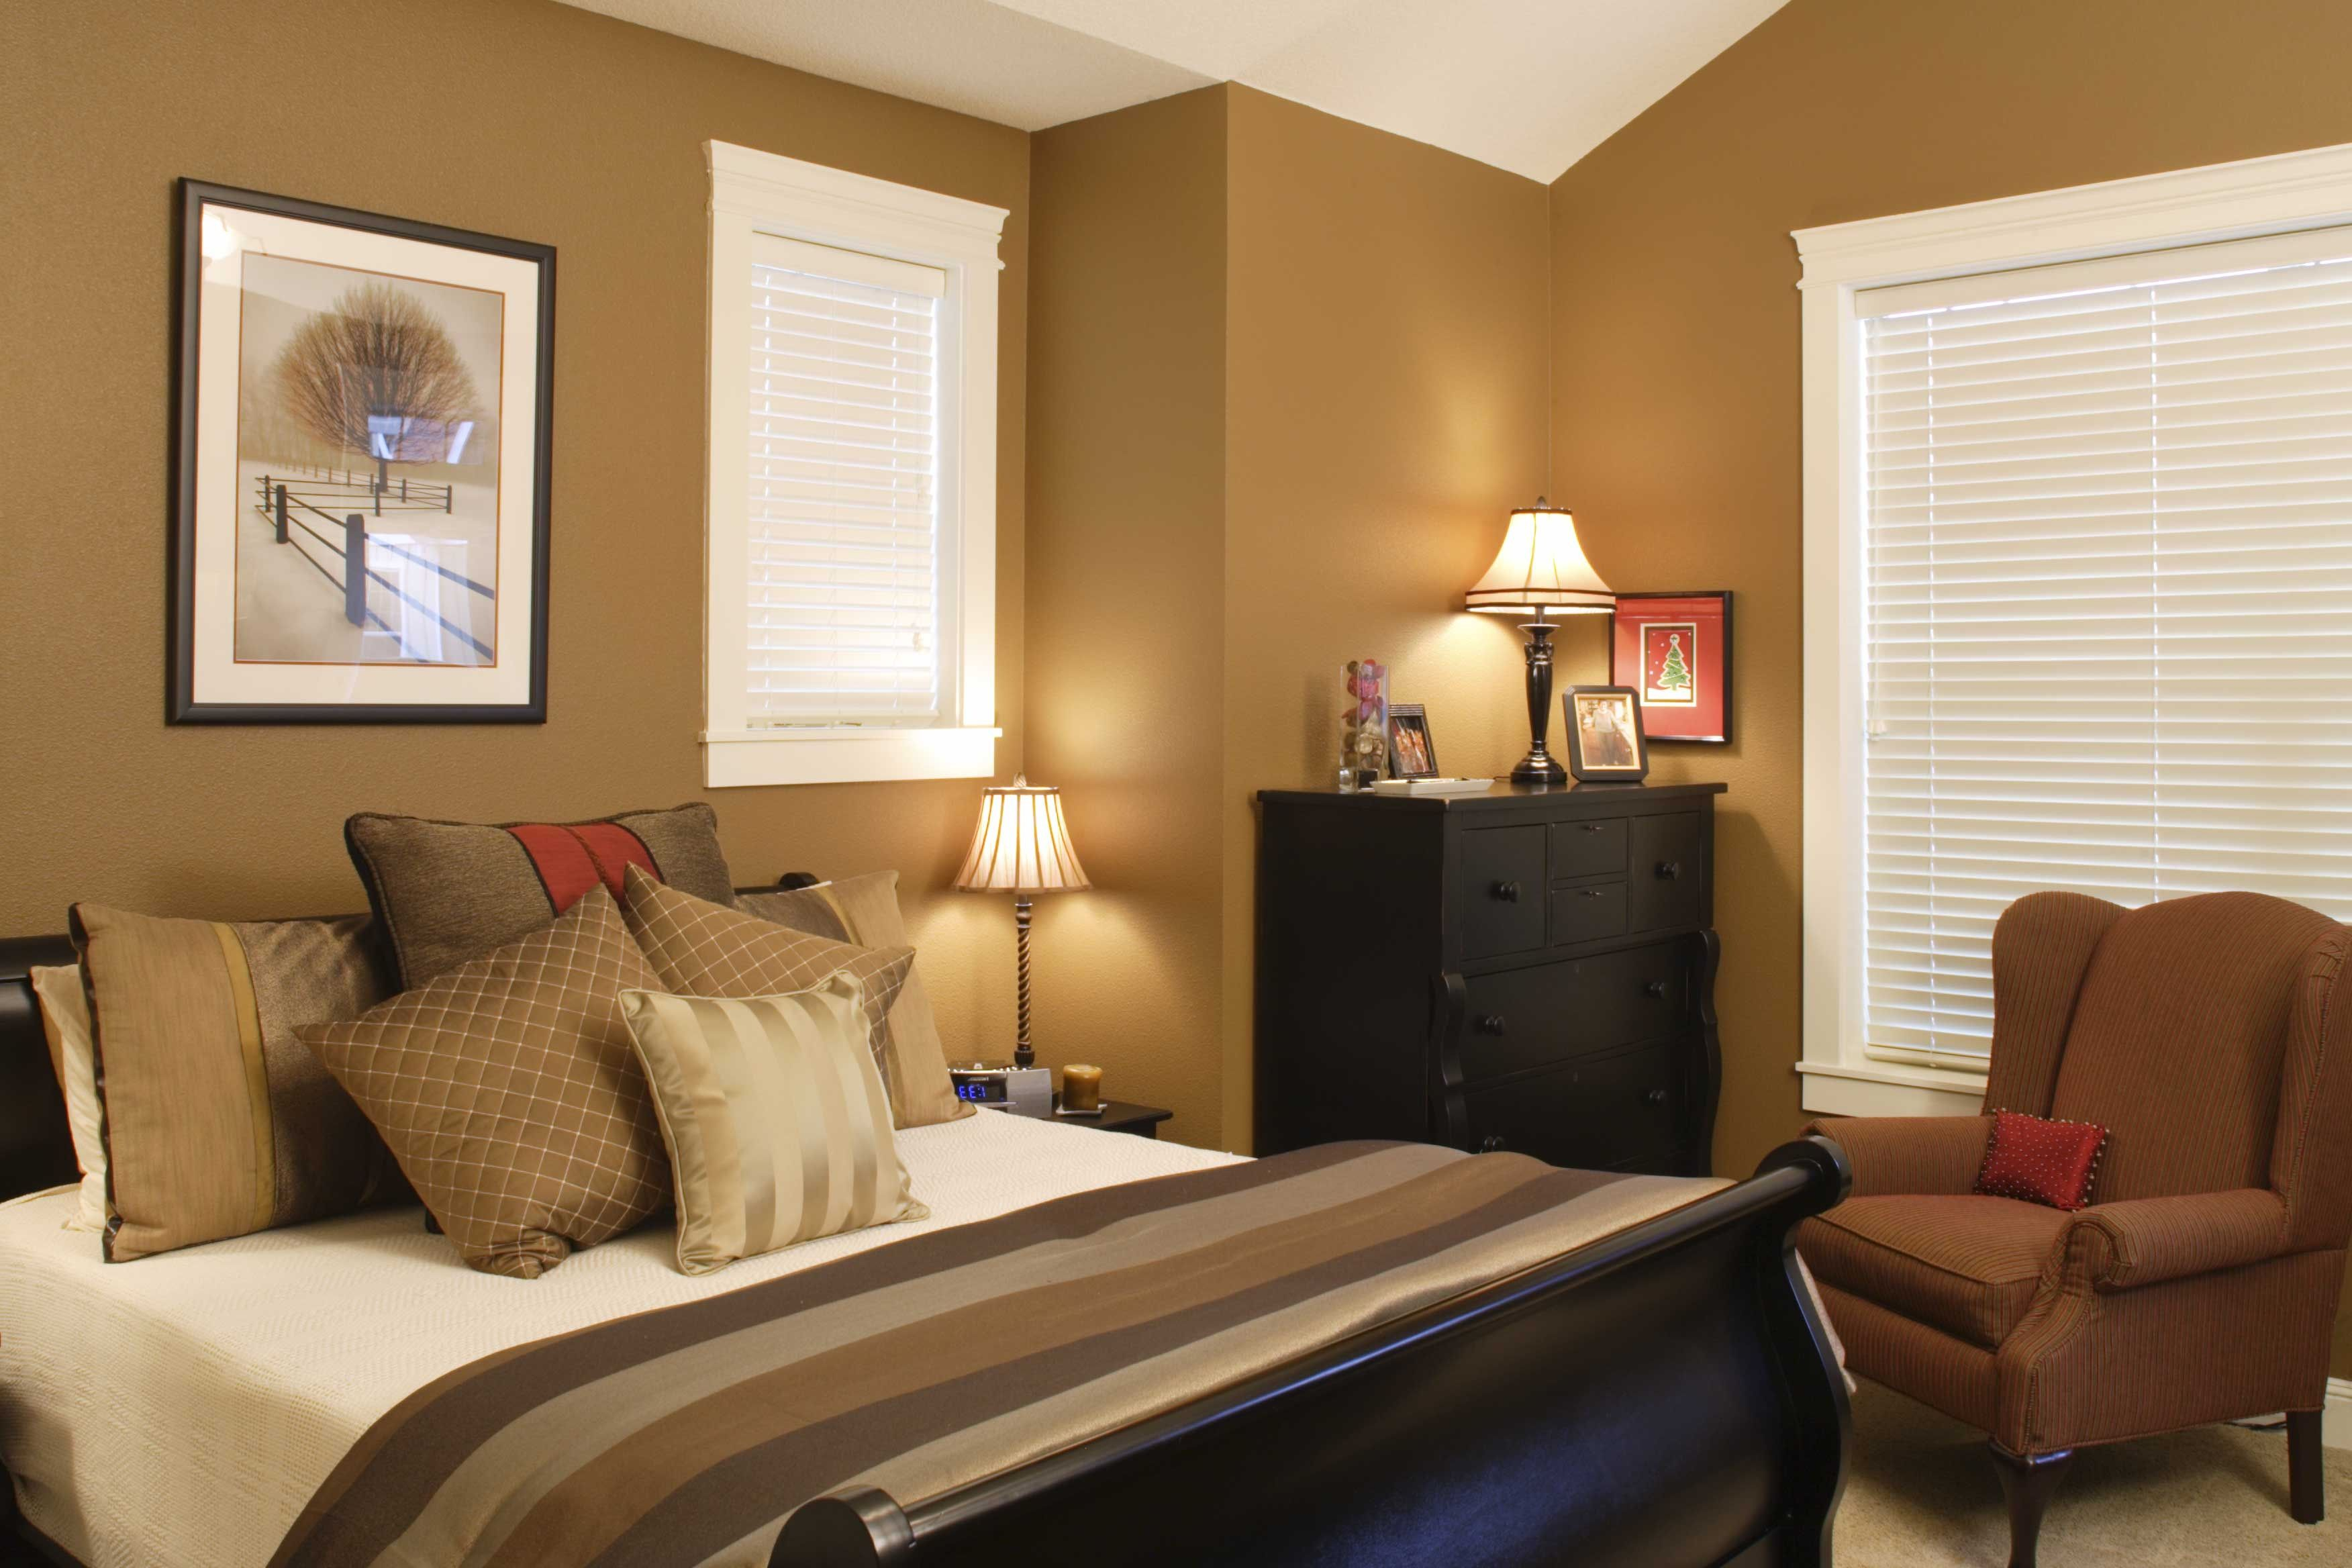 Painting Wall Colors Bedroom Paint Brown Colors Nice Bedroom Paint in size 3504 X 2336